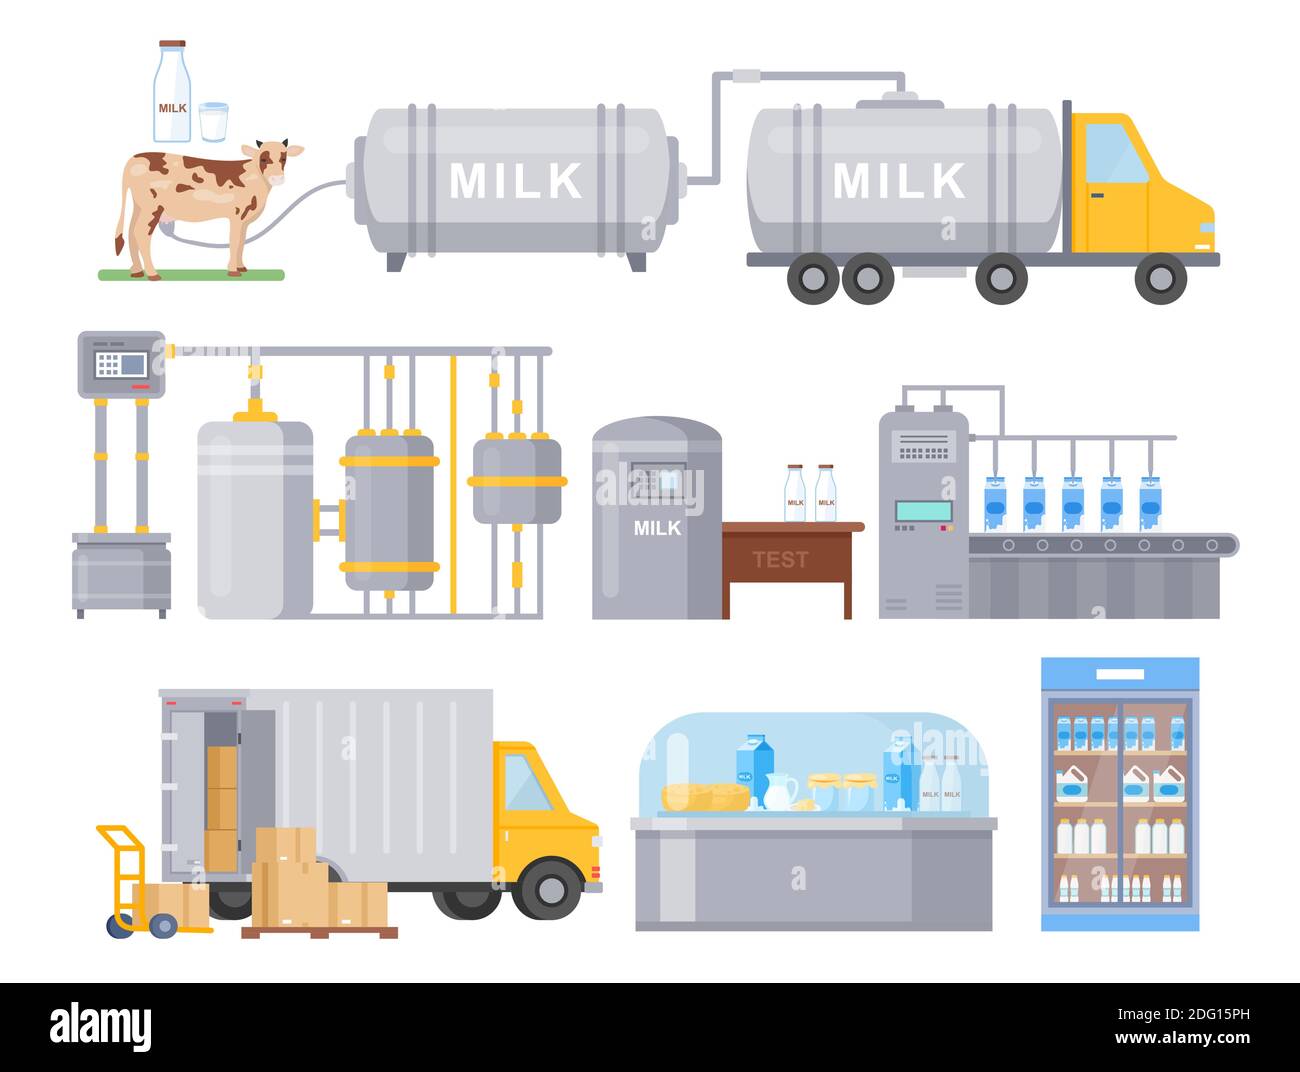 Cartoon technology for milk production, packaging, delivery to store, selling milk and cheese products isolated on white. Milk automated factory Stock Vector